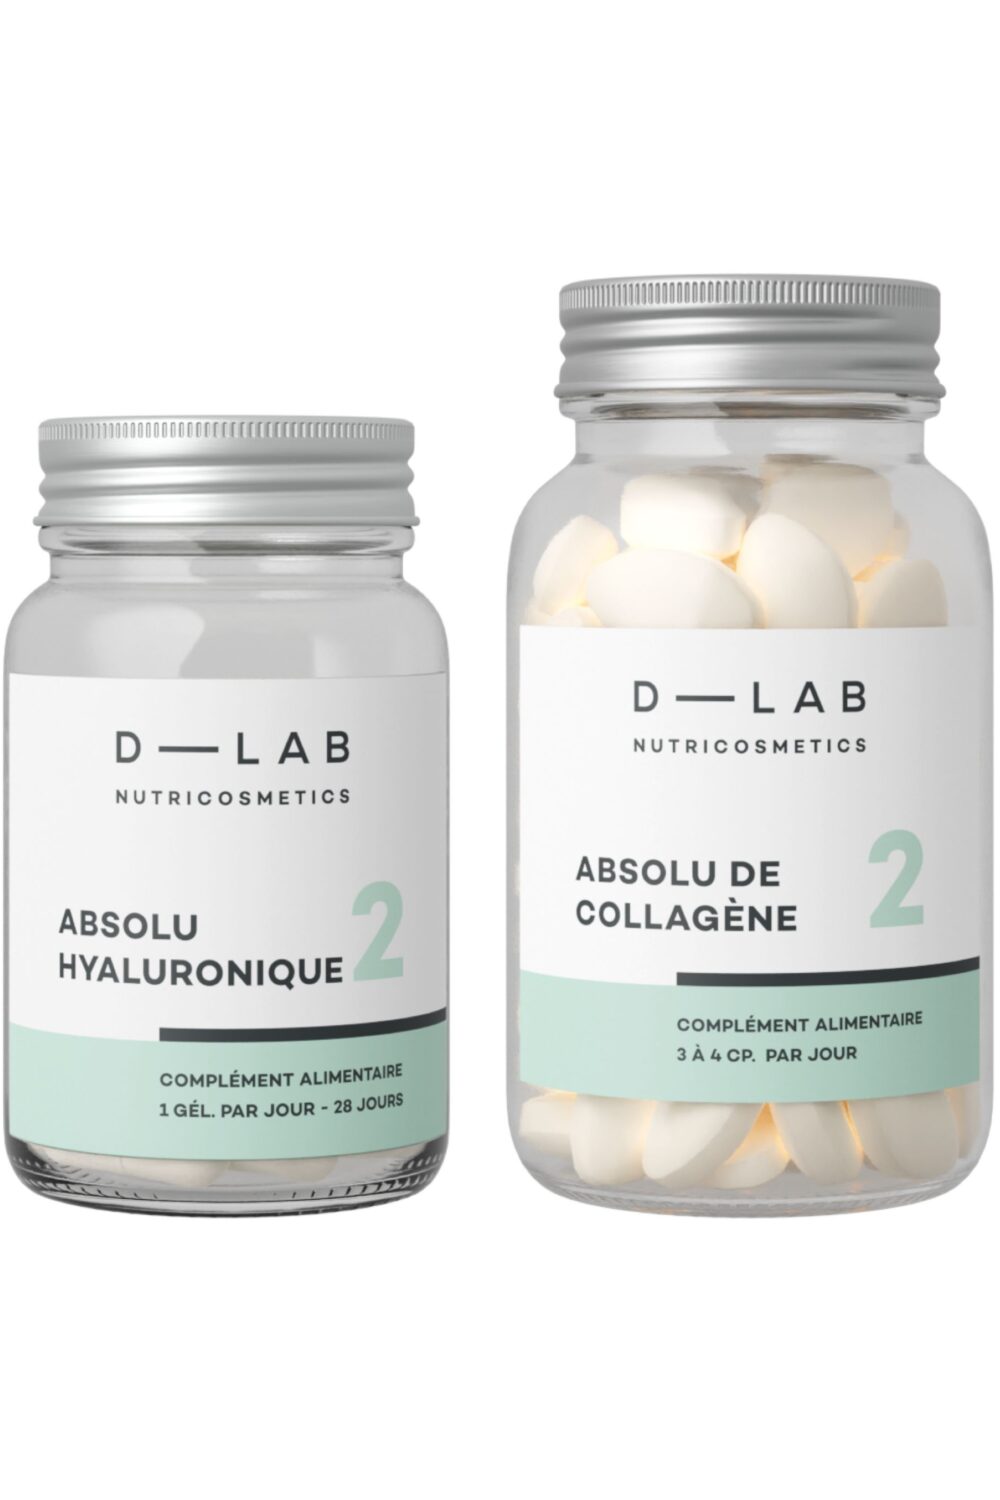 D-LAB Nutricosmetics - Compléments alimentaires duo Nutrition-Absolue